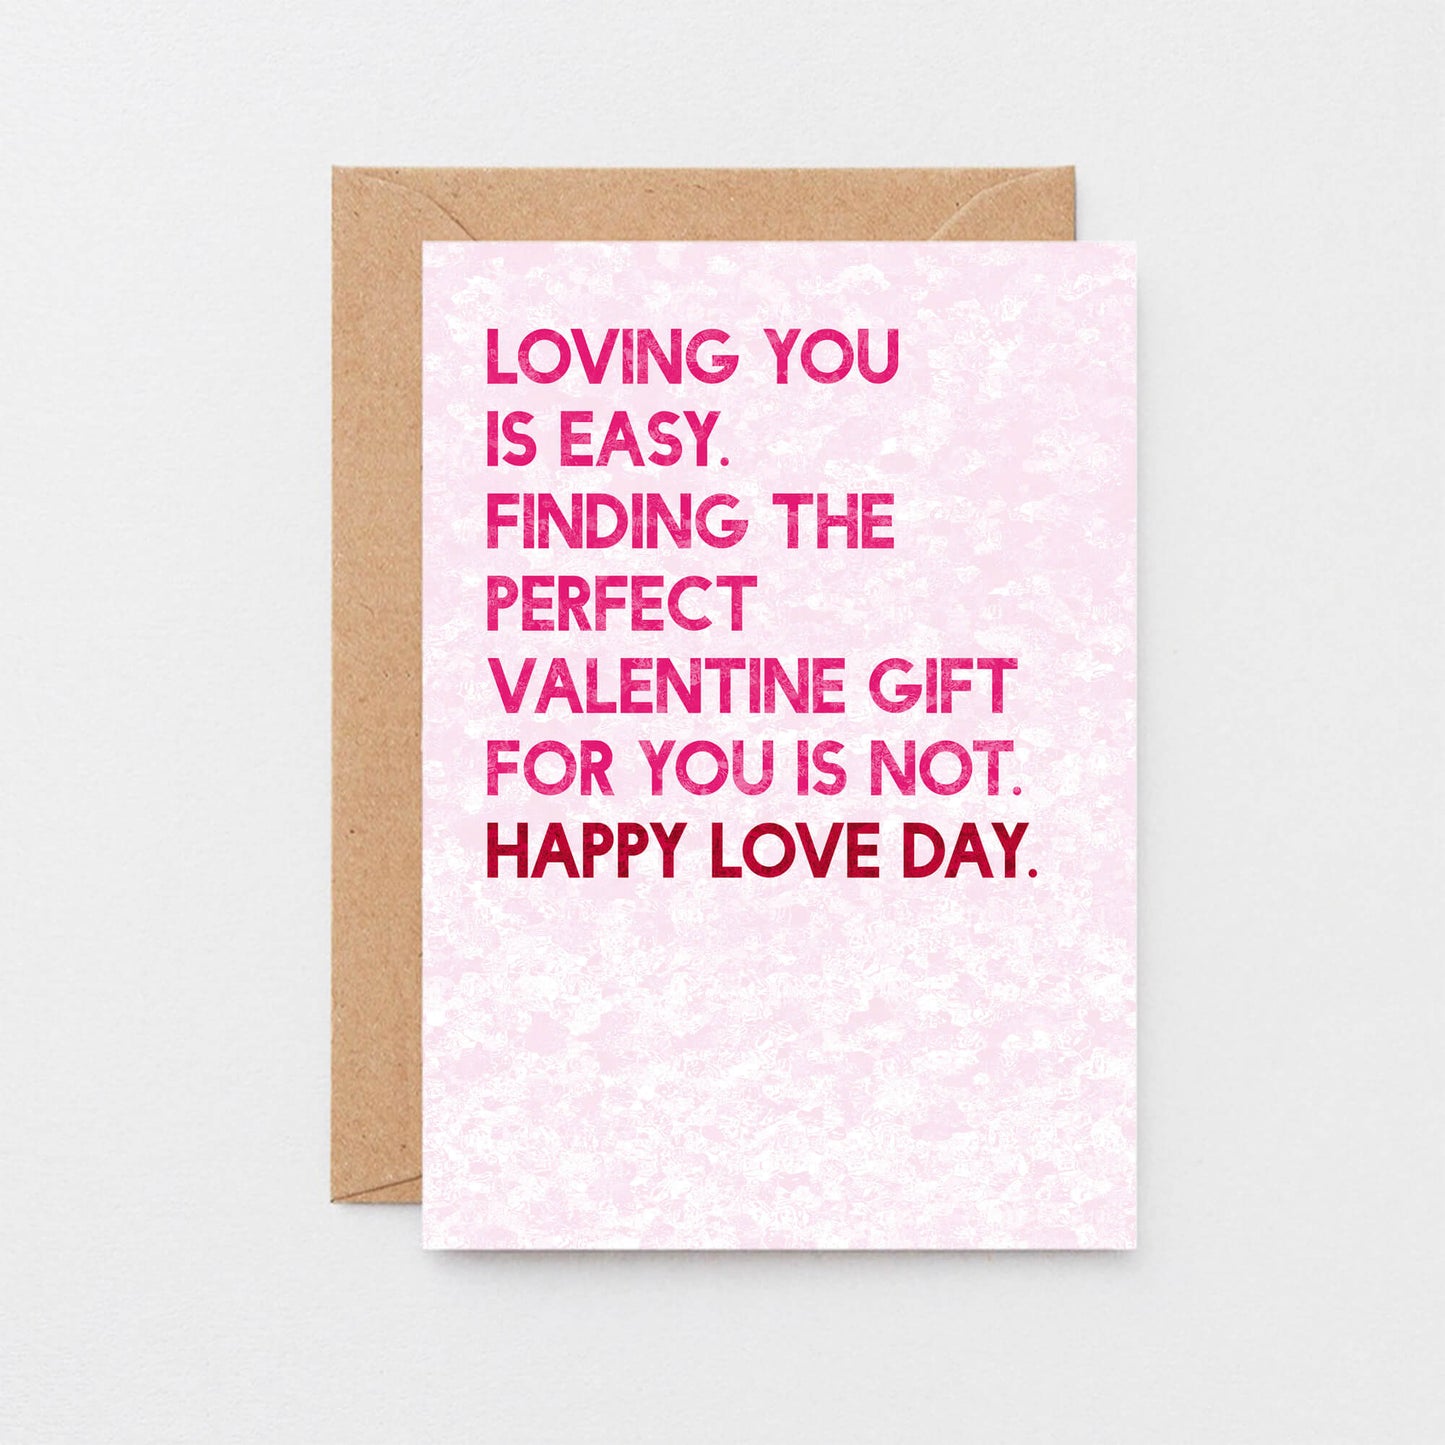 Valentine Card by SixElevenCreations. Reads Loving you is easy. Finding the perfect Valentine gift for you is not. Happy Love Day. Product Code SEV0043A6